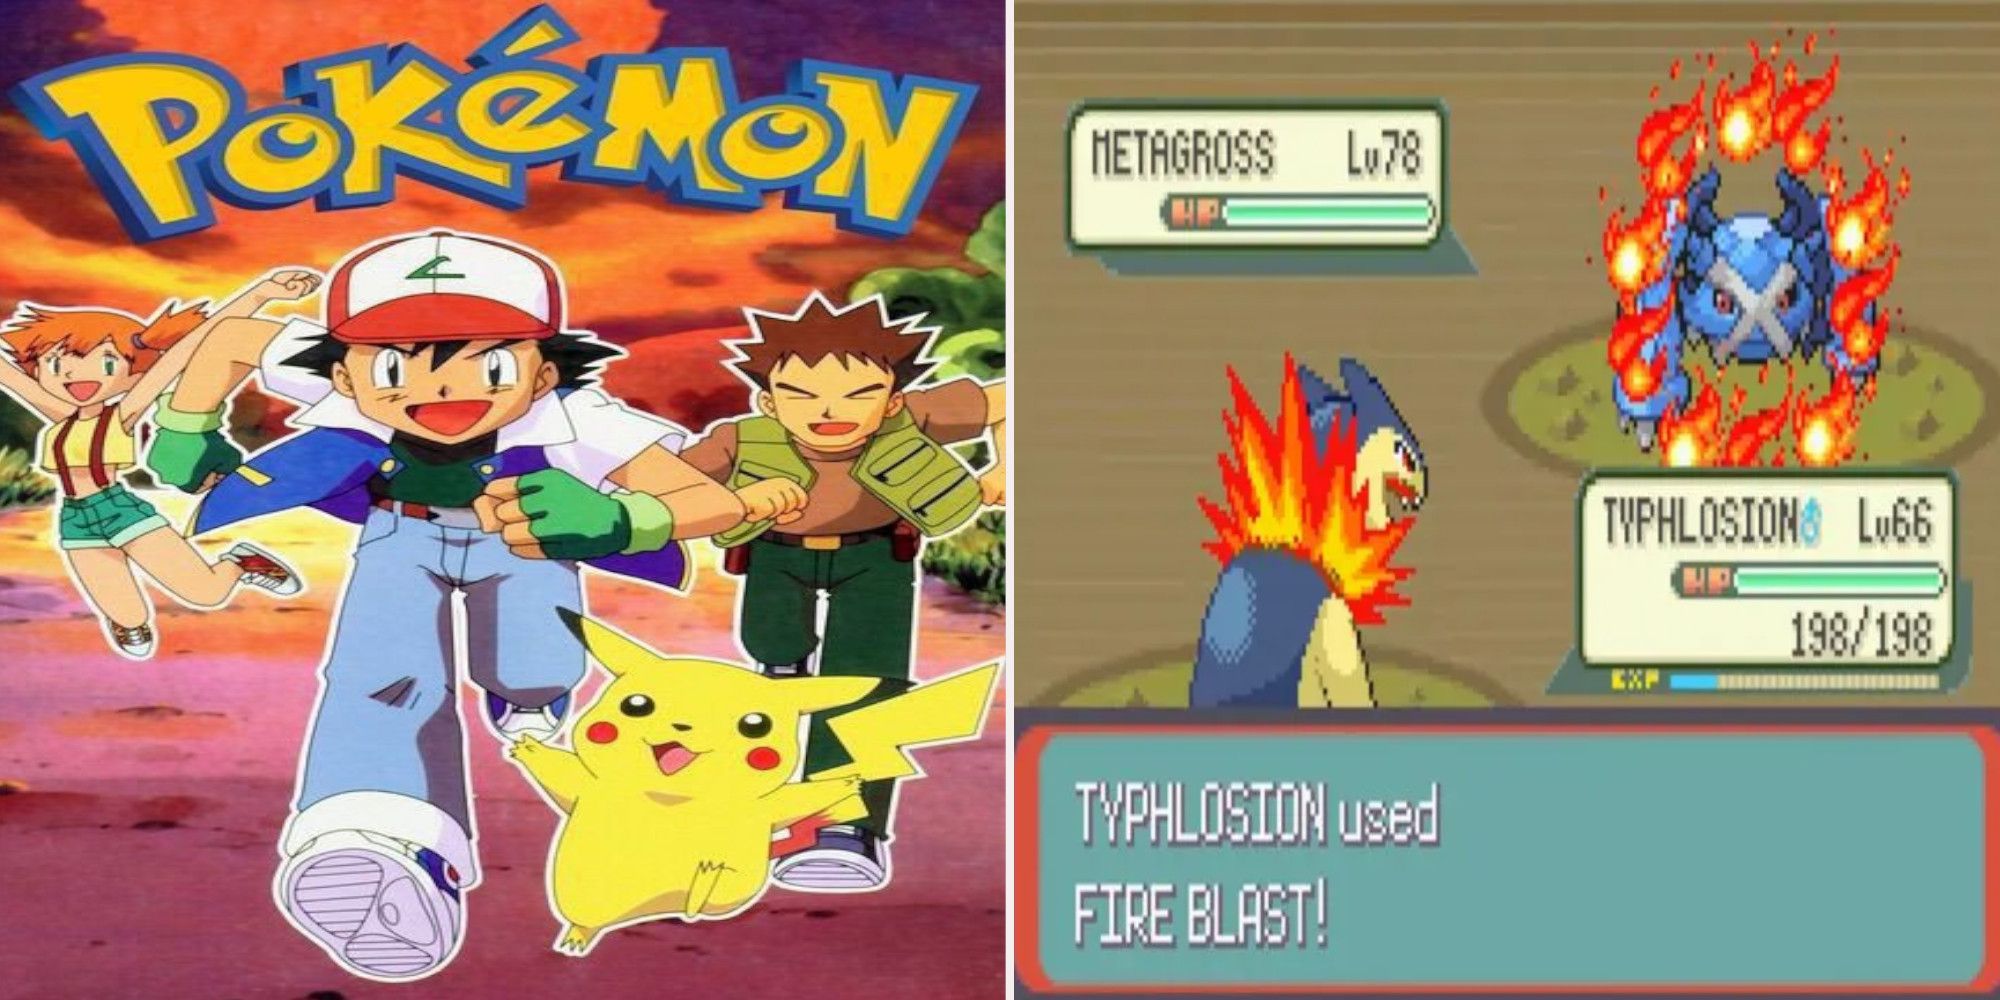 Ash and Friends Run At Screen In Anime While Two High Level Pokemon Battle